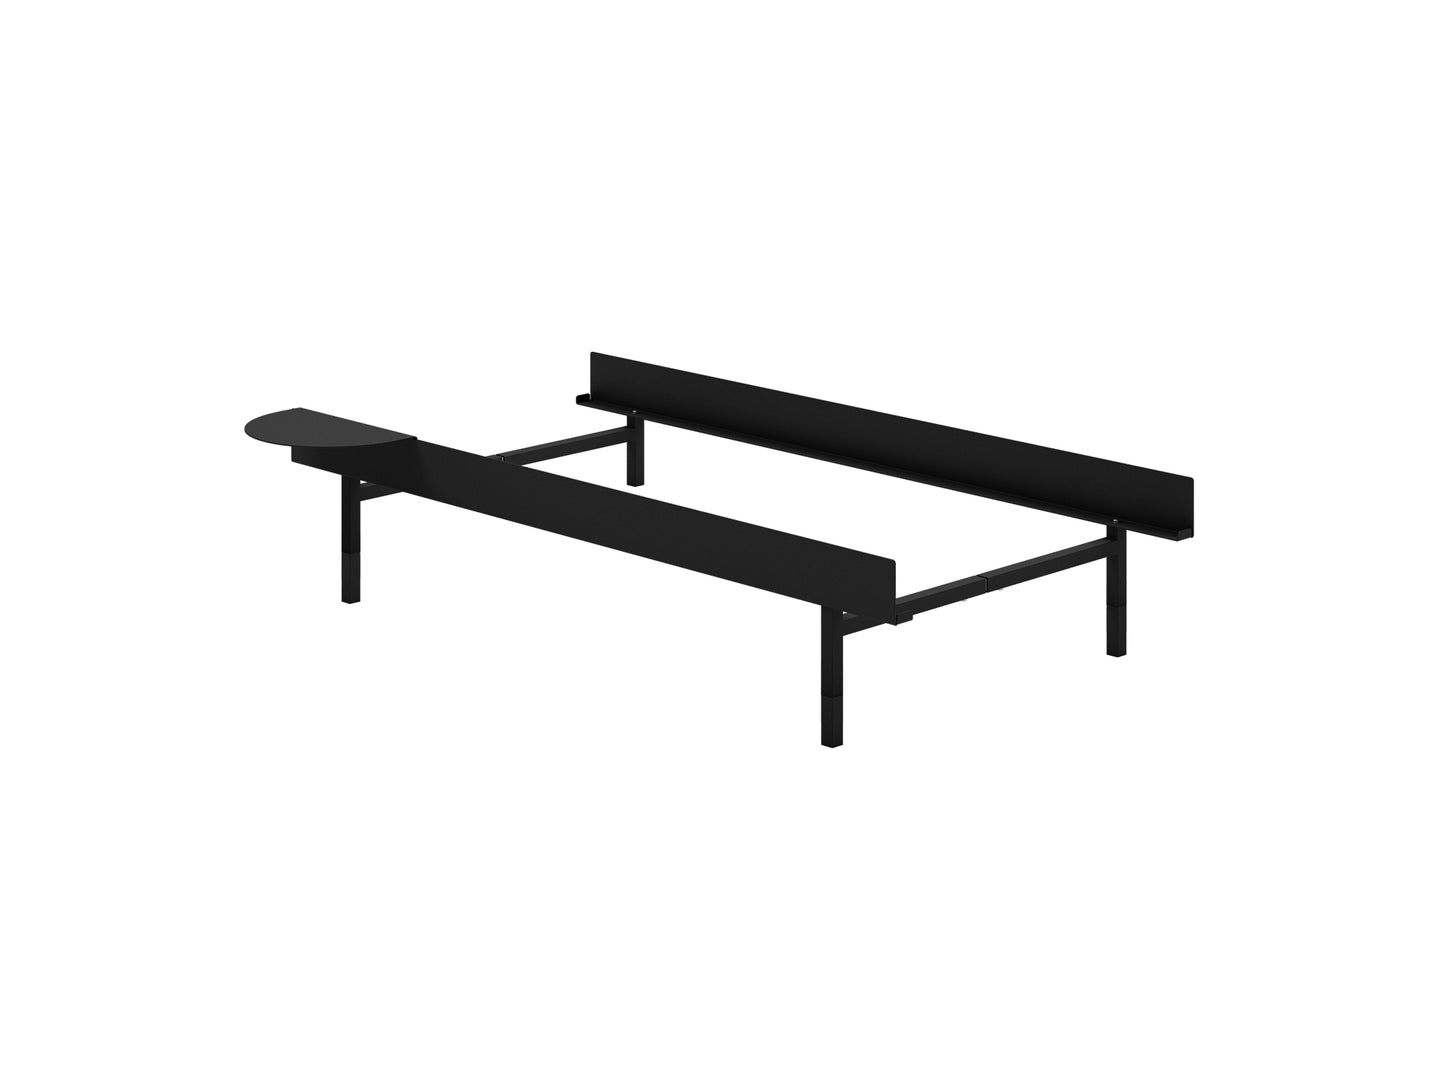 Bed 90 - 180 cm (High) by Moebe- Bed Frame / with NO SLATS / 1 Side Table / Black